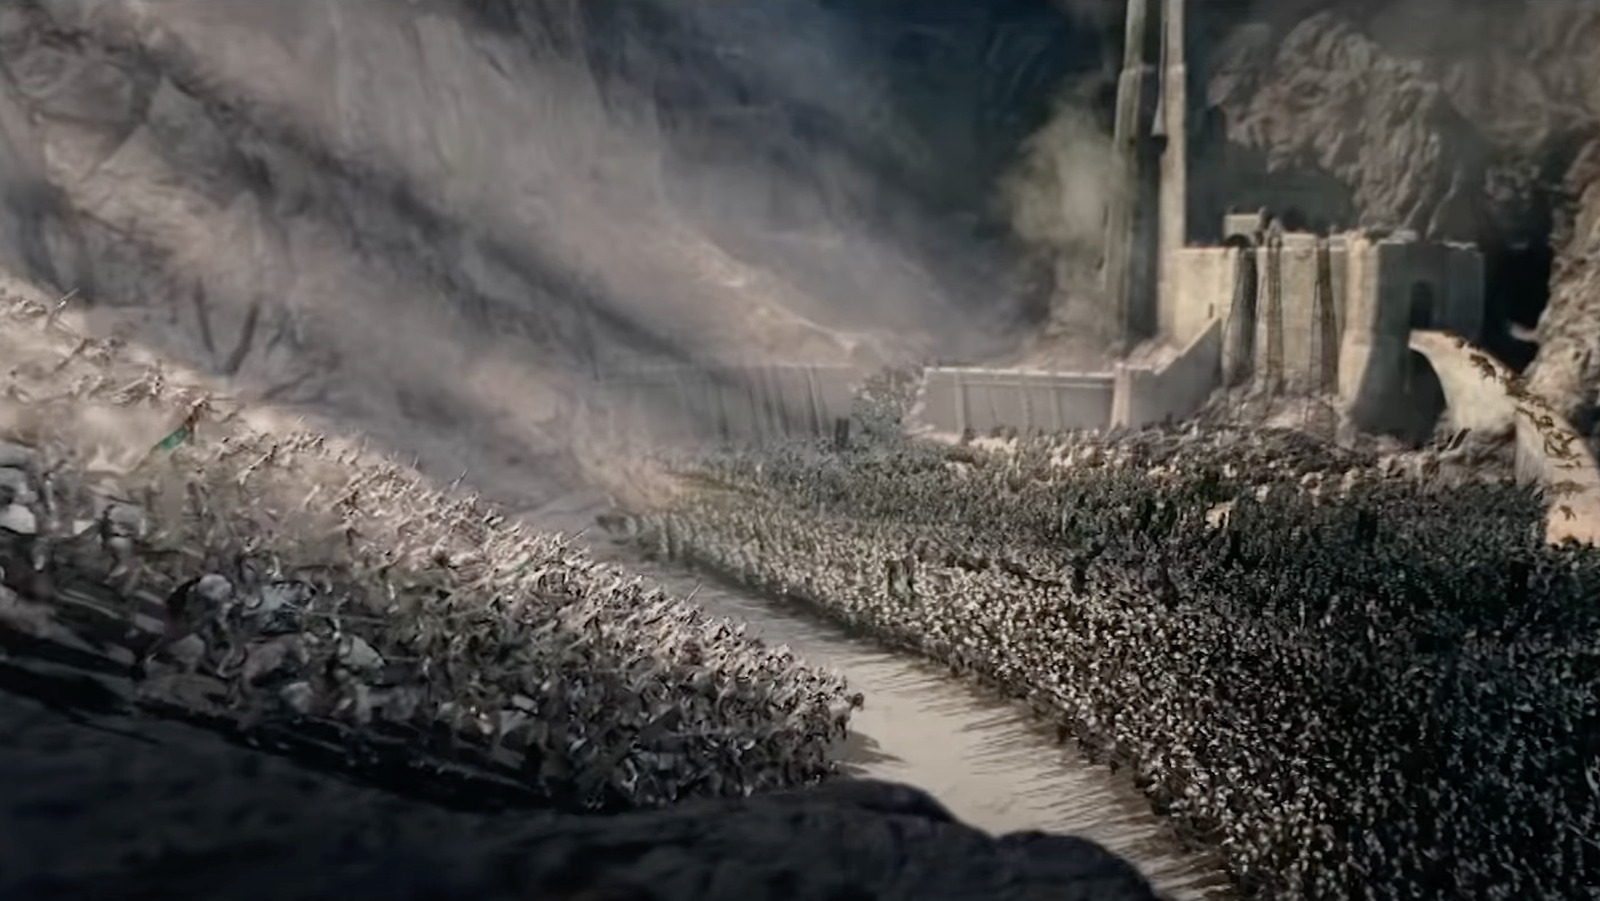 The Lord of the Rings: War of the Rohirrim vs The Rings of Power